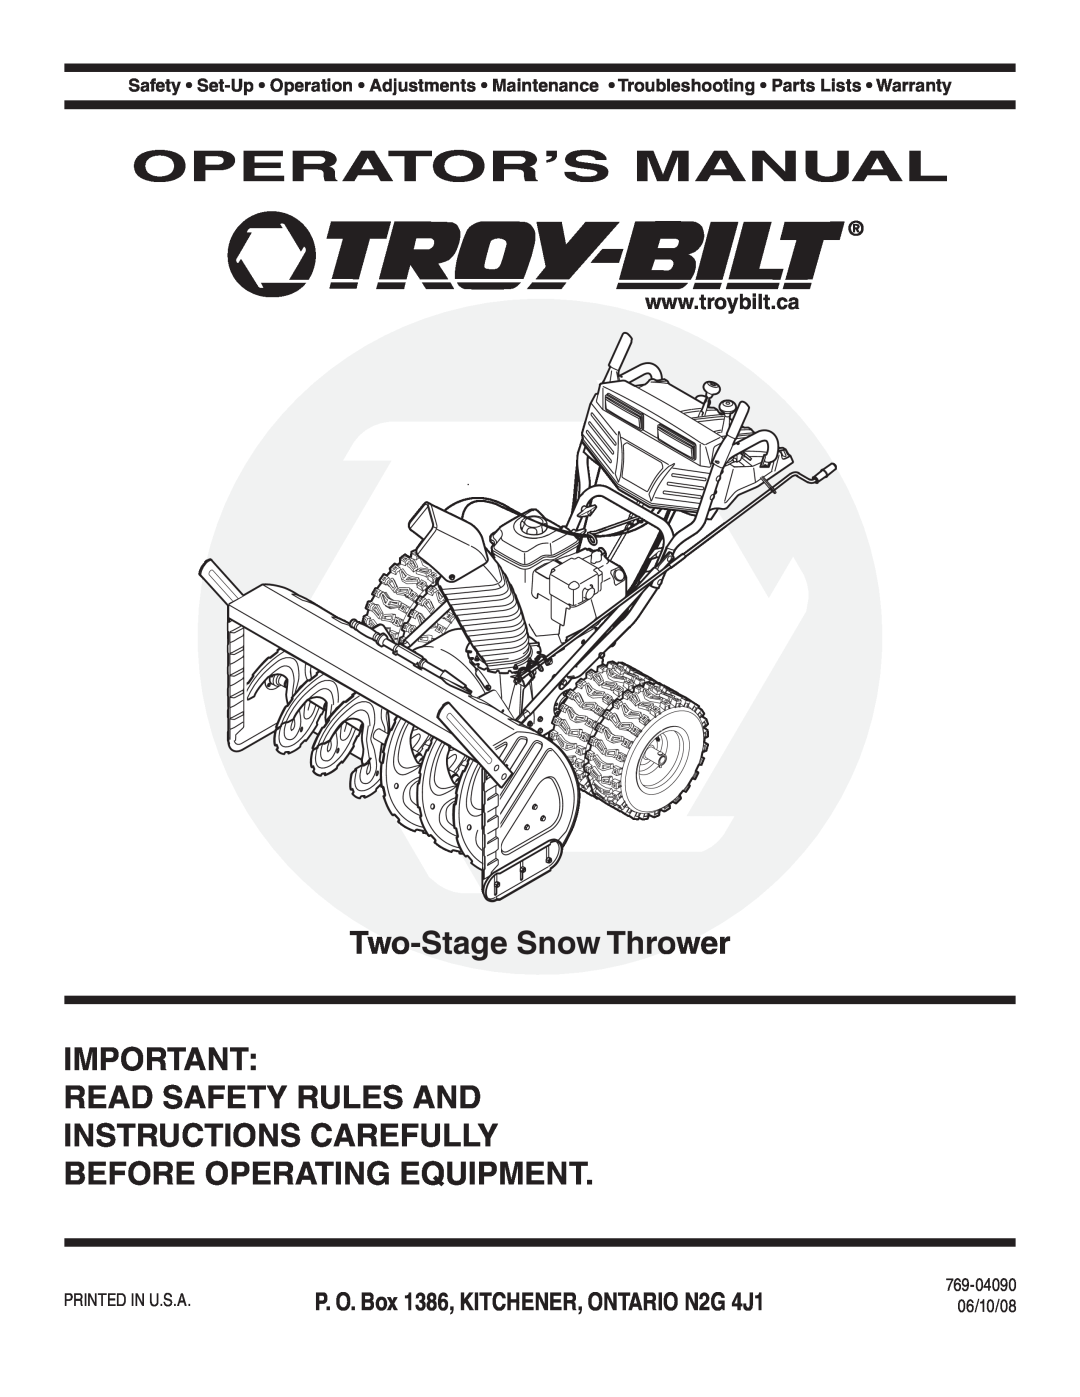 Troy-Bilt 769-04090 warranty Operator’S Manual, Two-Stage Snow Thrower, Read Safety Rules And Instructions Carefully 